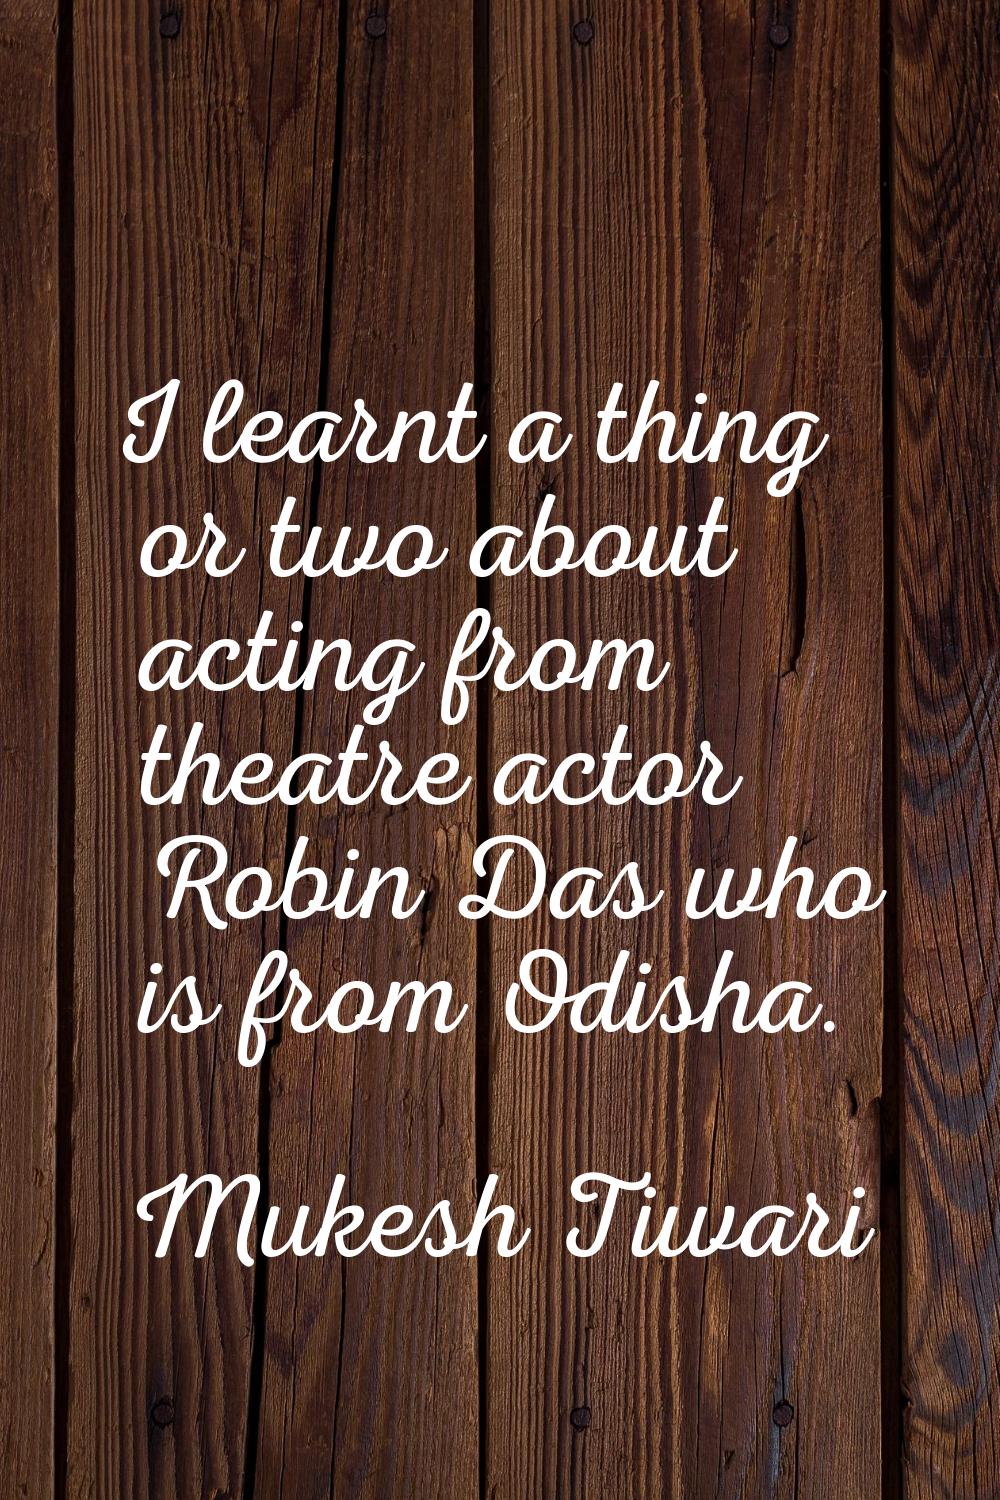 I learnt a thing or two about acting from theatre actor Robin Das who is from Odisha.